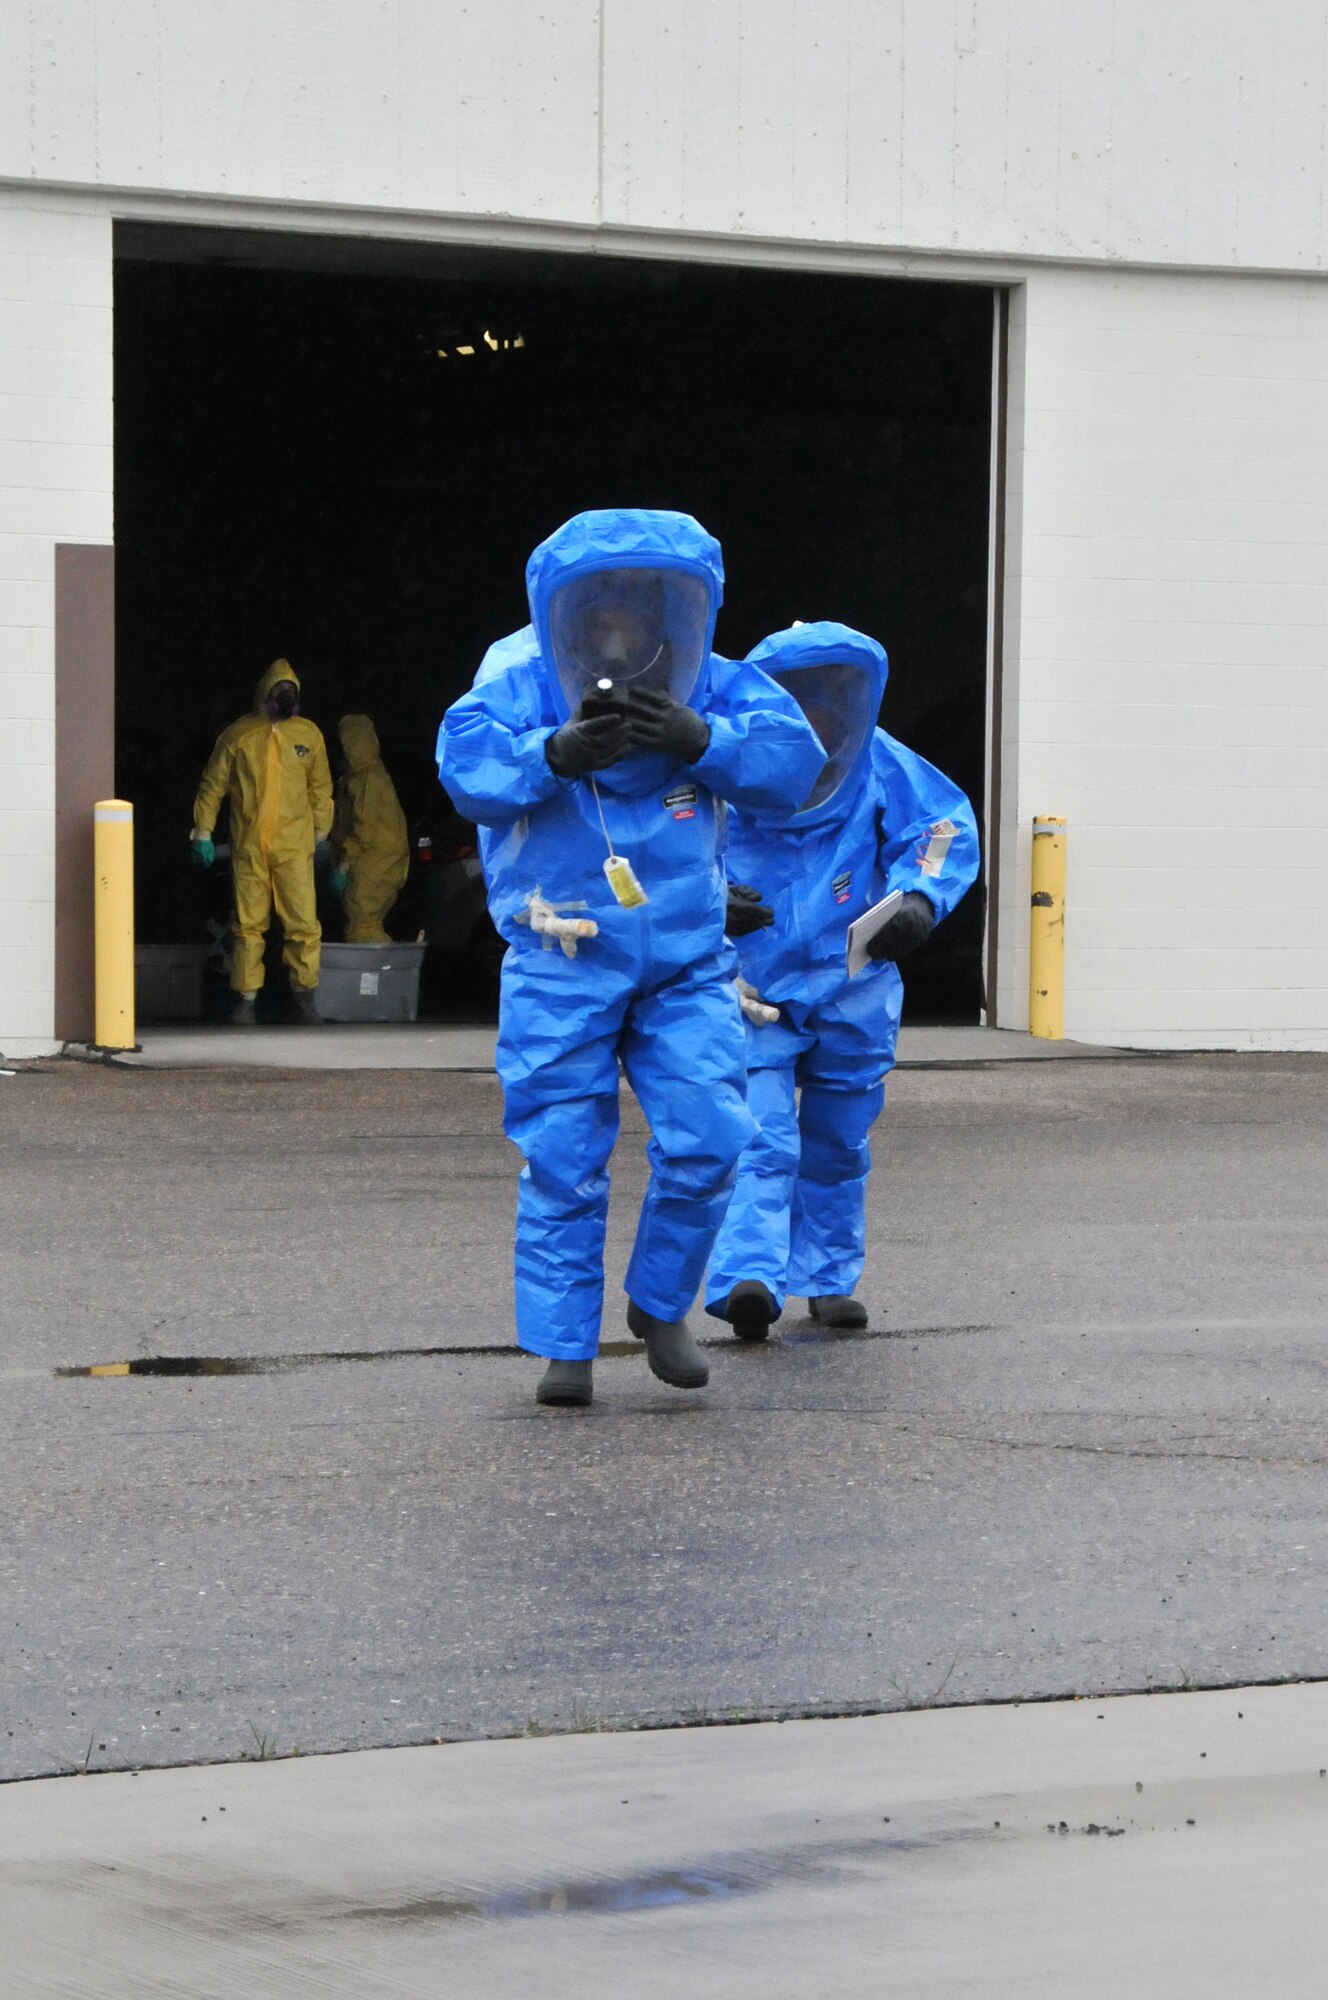 120th Airlift Wing members Tech. Sgt. Lee Dresch and Tech. Sgt. Dale Vig walk to a facility containing a simulated hazardous material spill during a Hazardous Waste Operations and Emergency Response (HAZWOPER) class held at the 120th Airlift Wing in Great Falls Mont. May 20, 2016. The 120th AW offers a 40 hour course and 8 hour refresher course annually. (U.S. Air National Guard photo/Senior Master Sgt. Eric Peterson)  